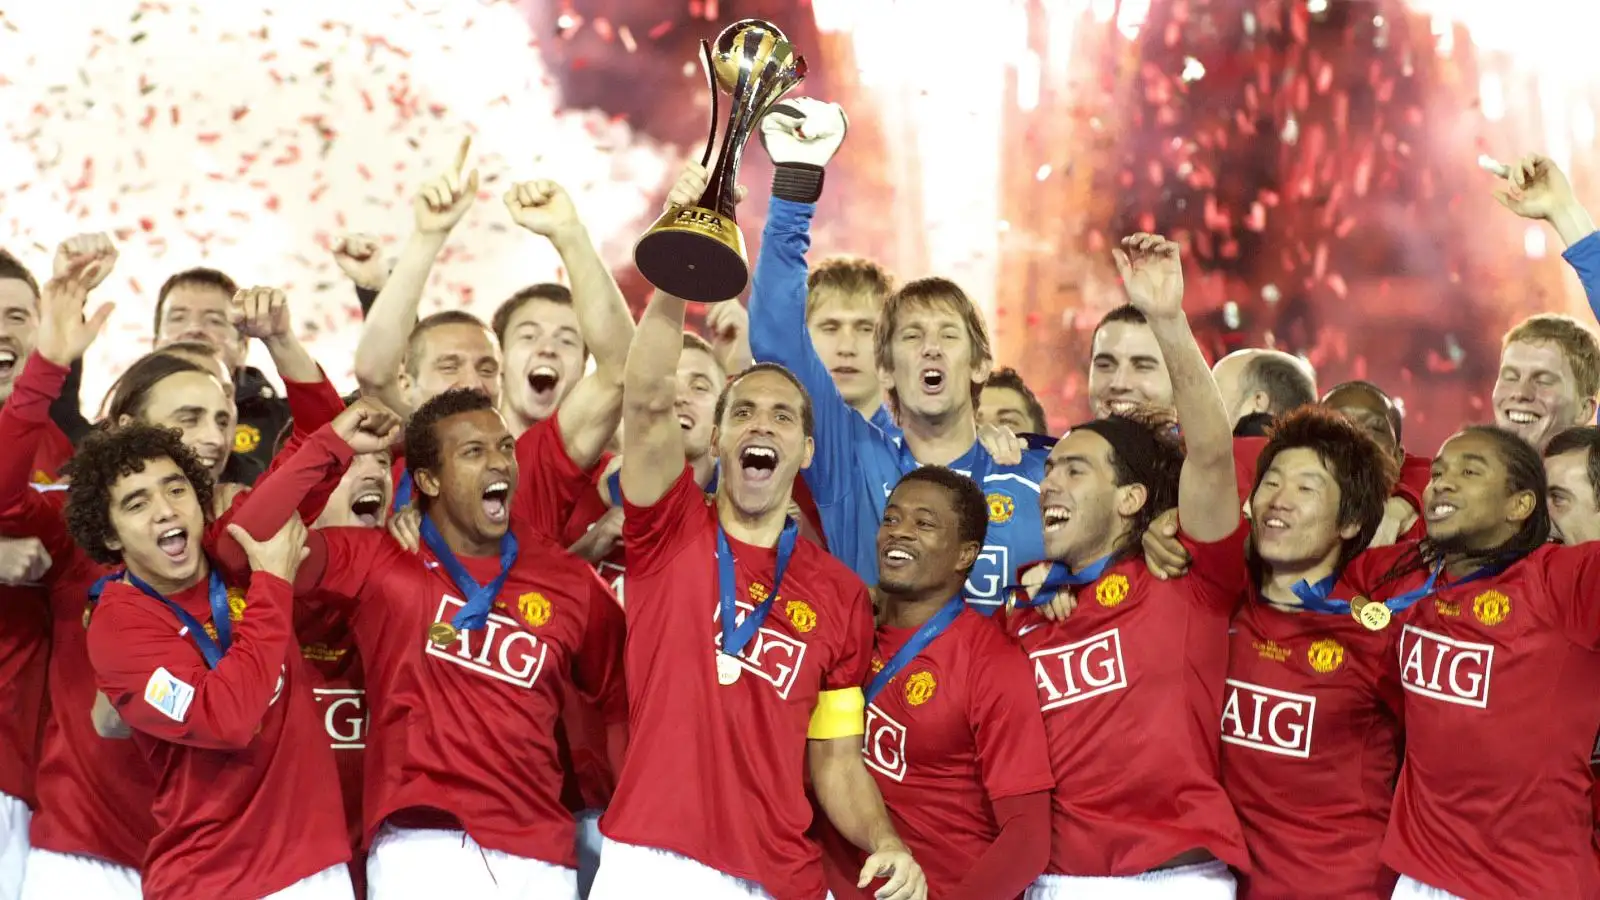 Manchester United celebrate winning the 2008 FIFA Club World Cup